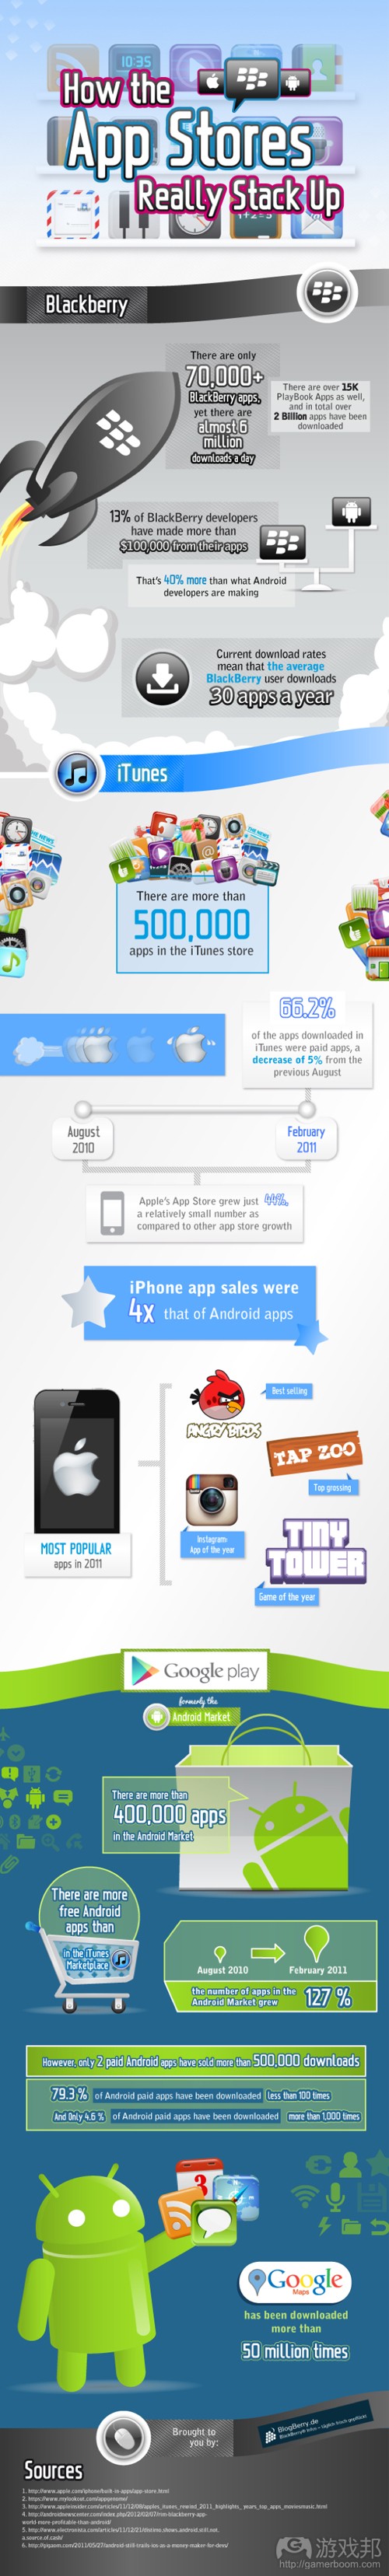 howtheapp_stores_infographic(from BlogBerry.de)